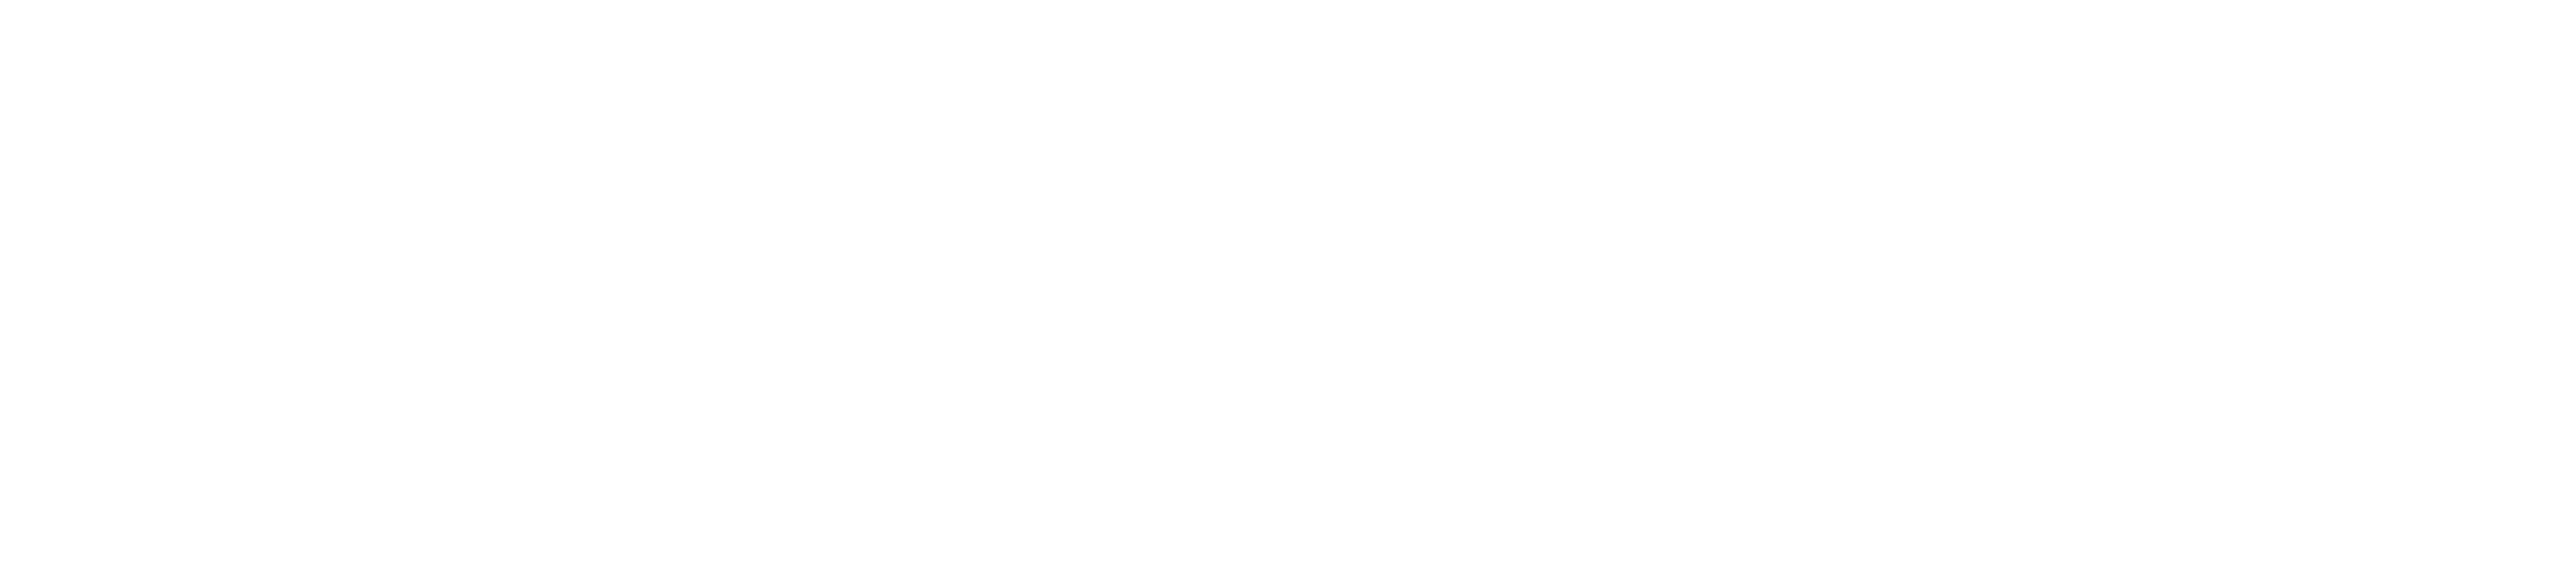 powered by community giving logo